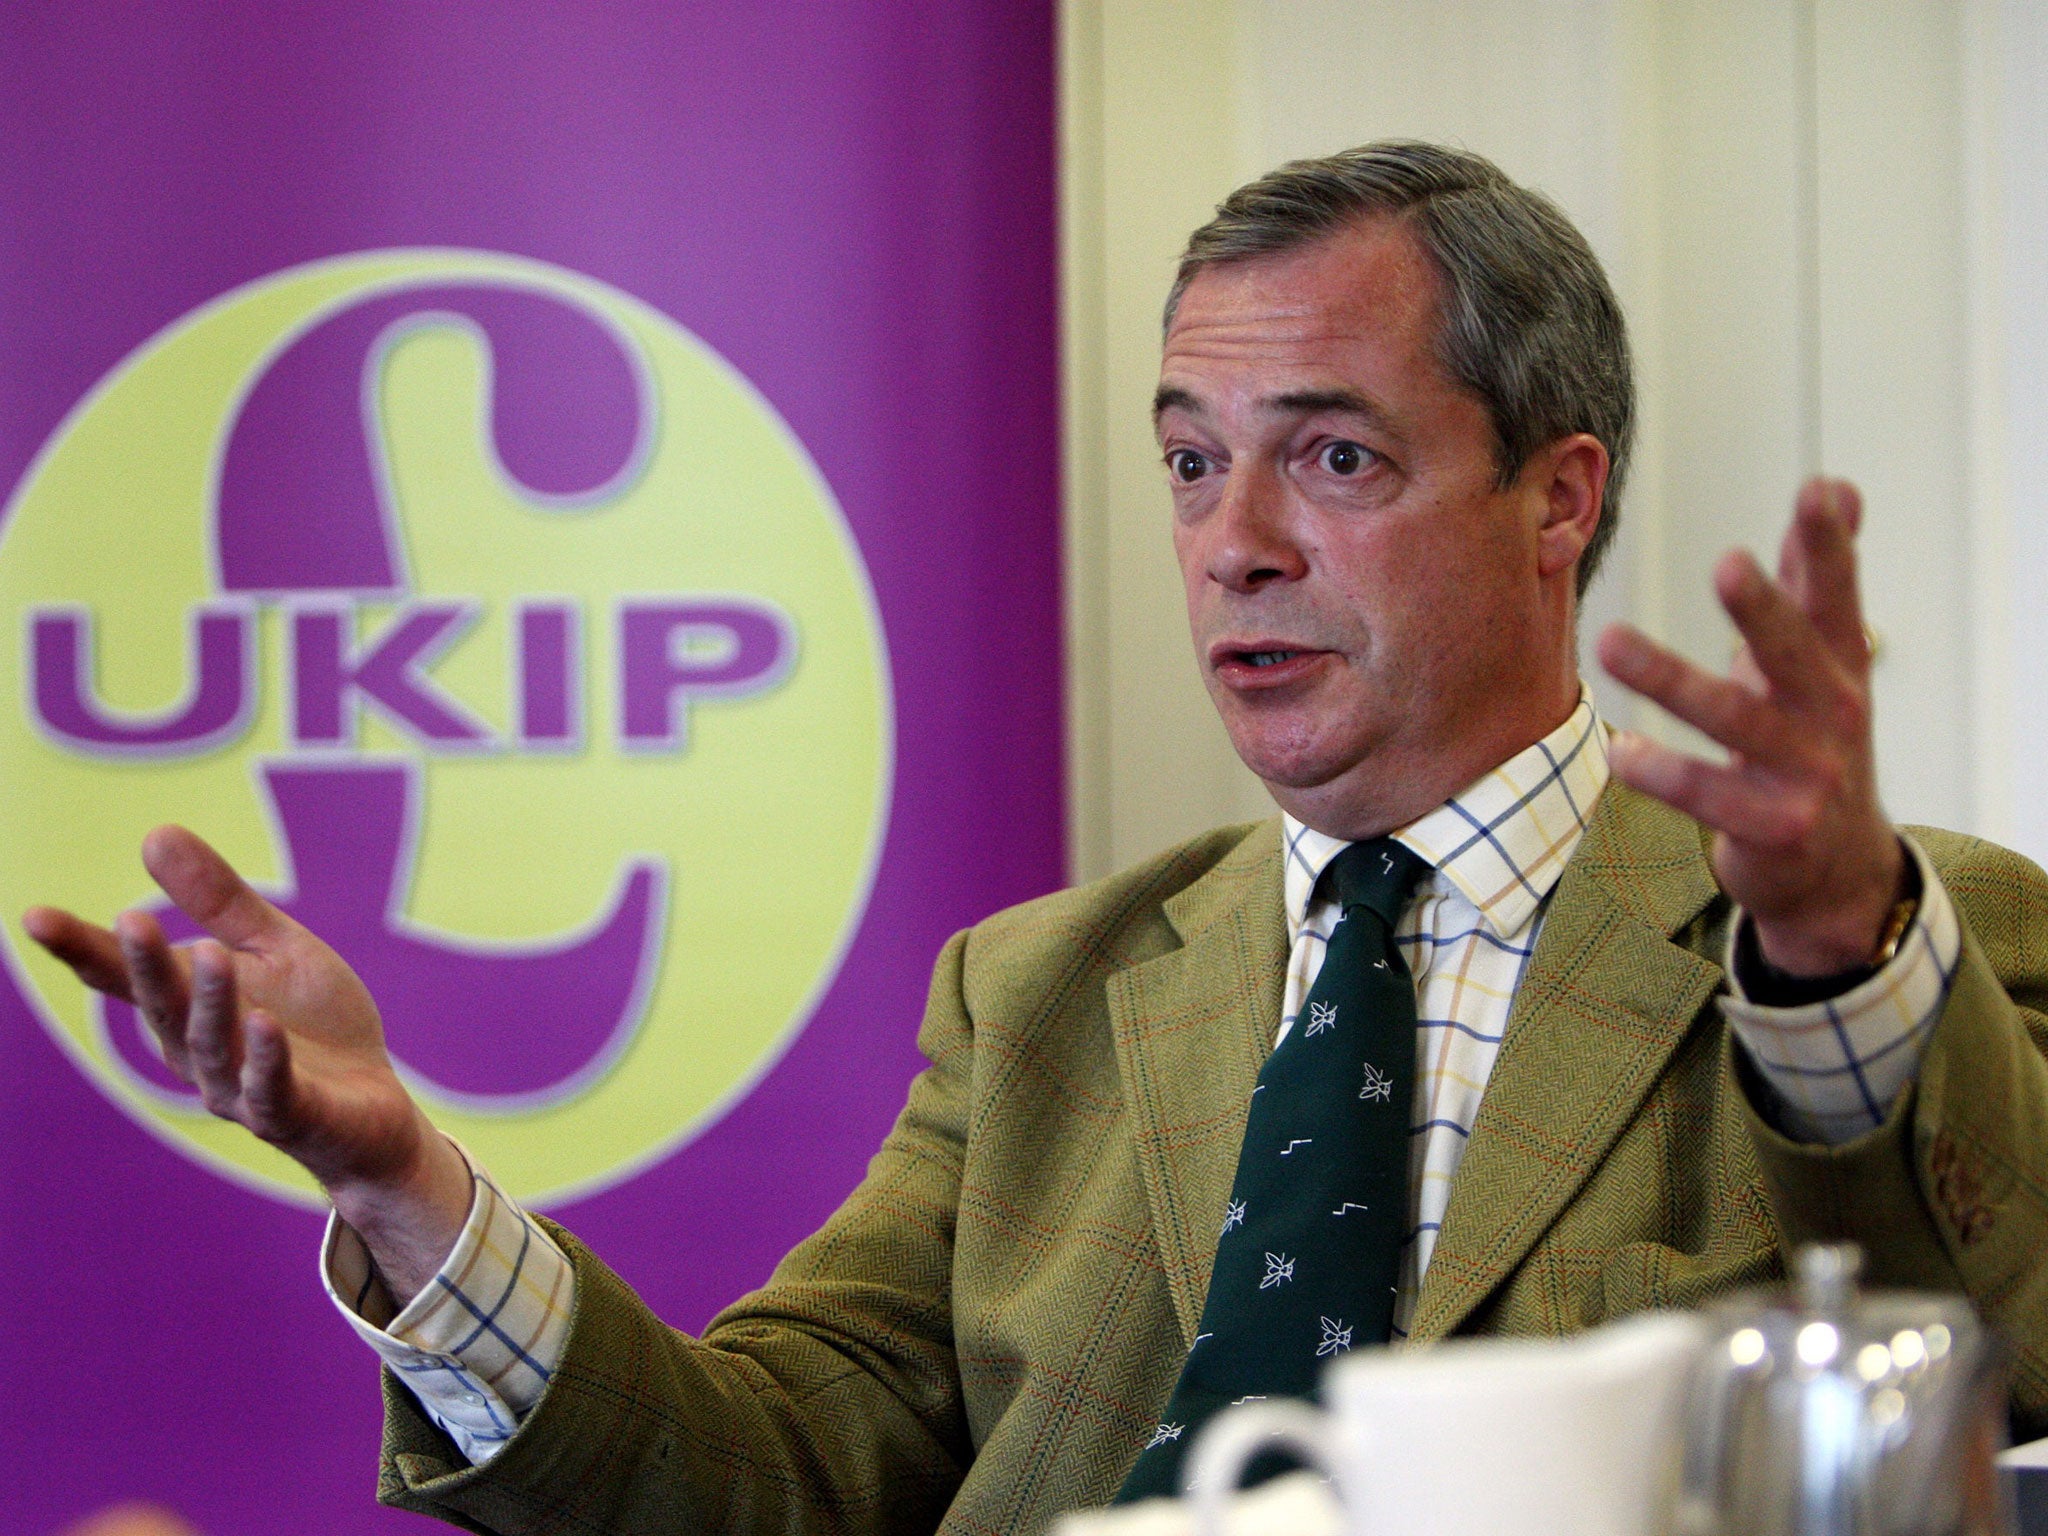 Nigel Farage has taken out a full-page advert in a national newspaper saying that 'Ukip is not a racist party'